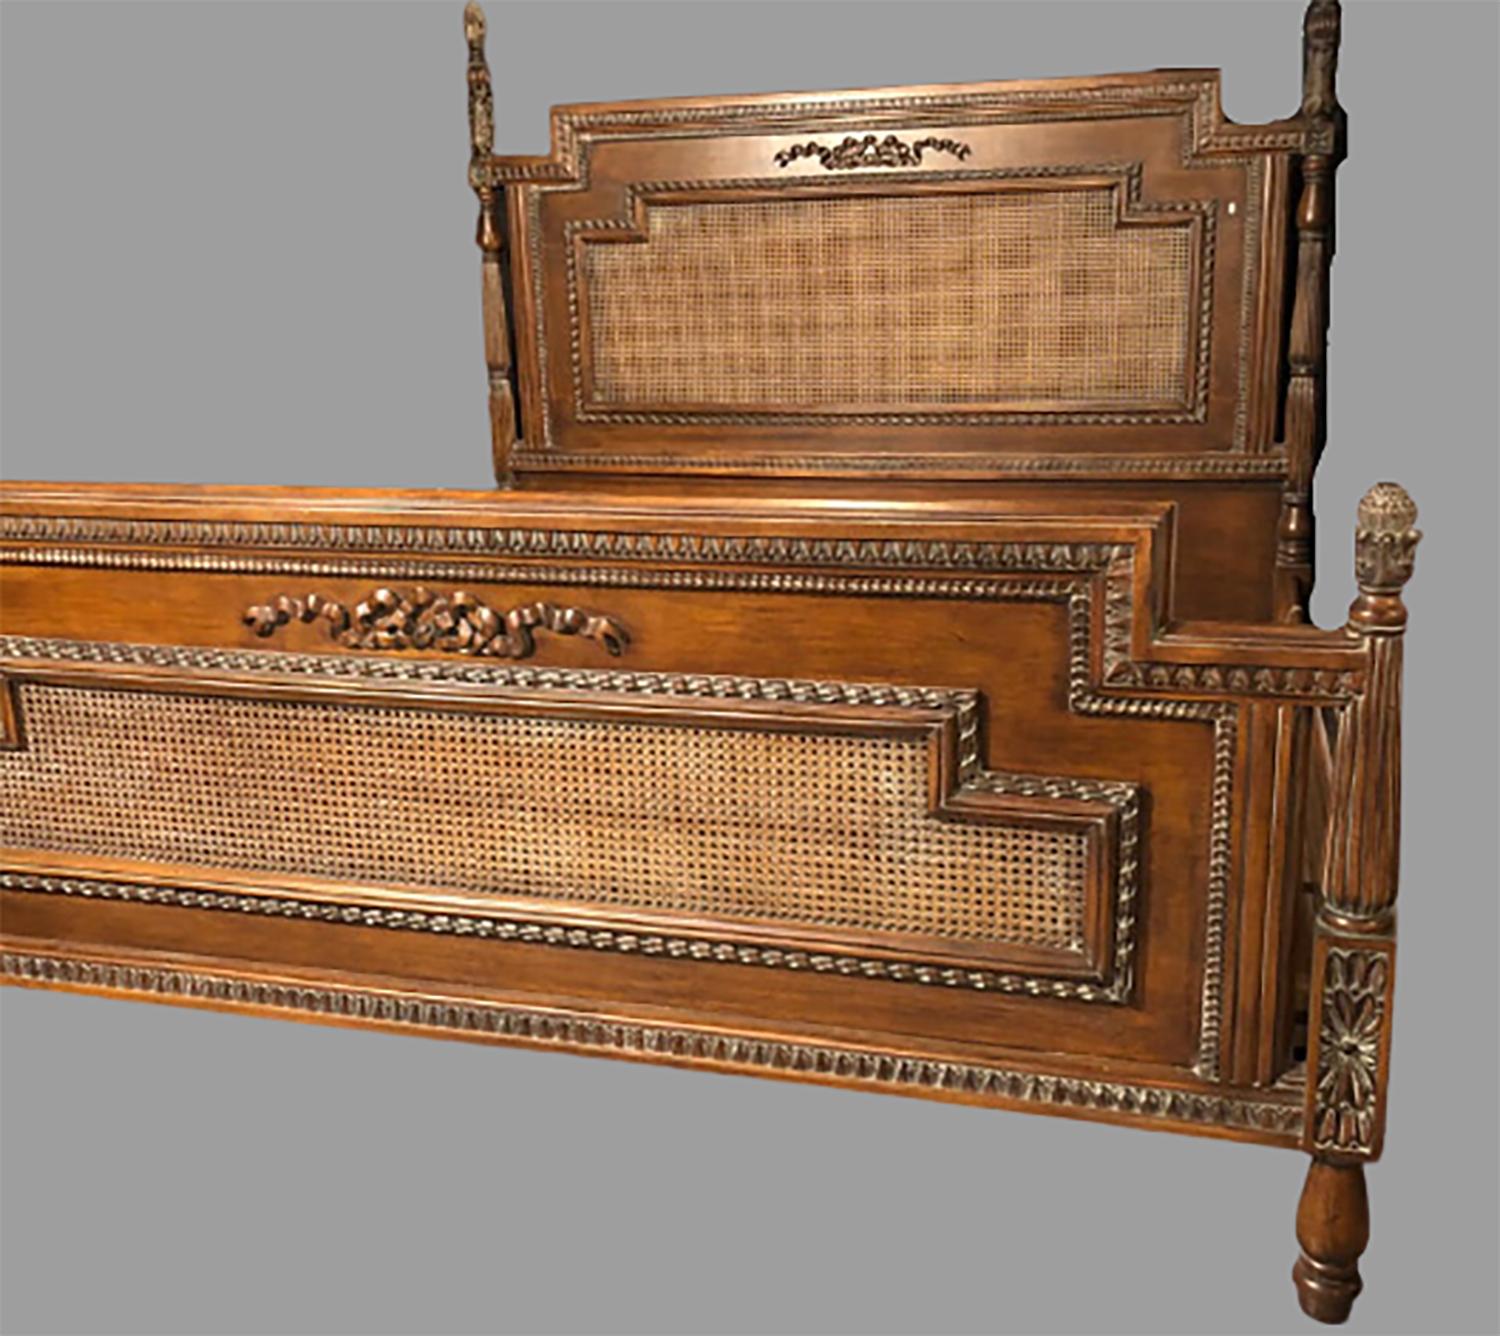 Antique walnut carved king sized bed. Headboard, foot-board and side-rails. This vintage finely carved and cane headboard and foot-board are simply stunning. Each having a ribbon and tassel carved front with pineapple carved posts, the set with cane